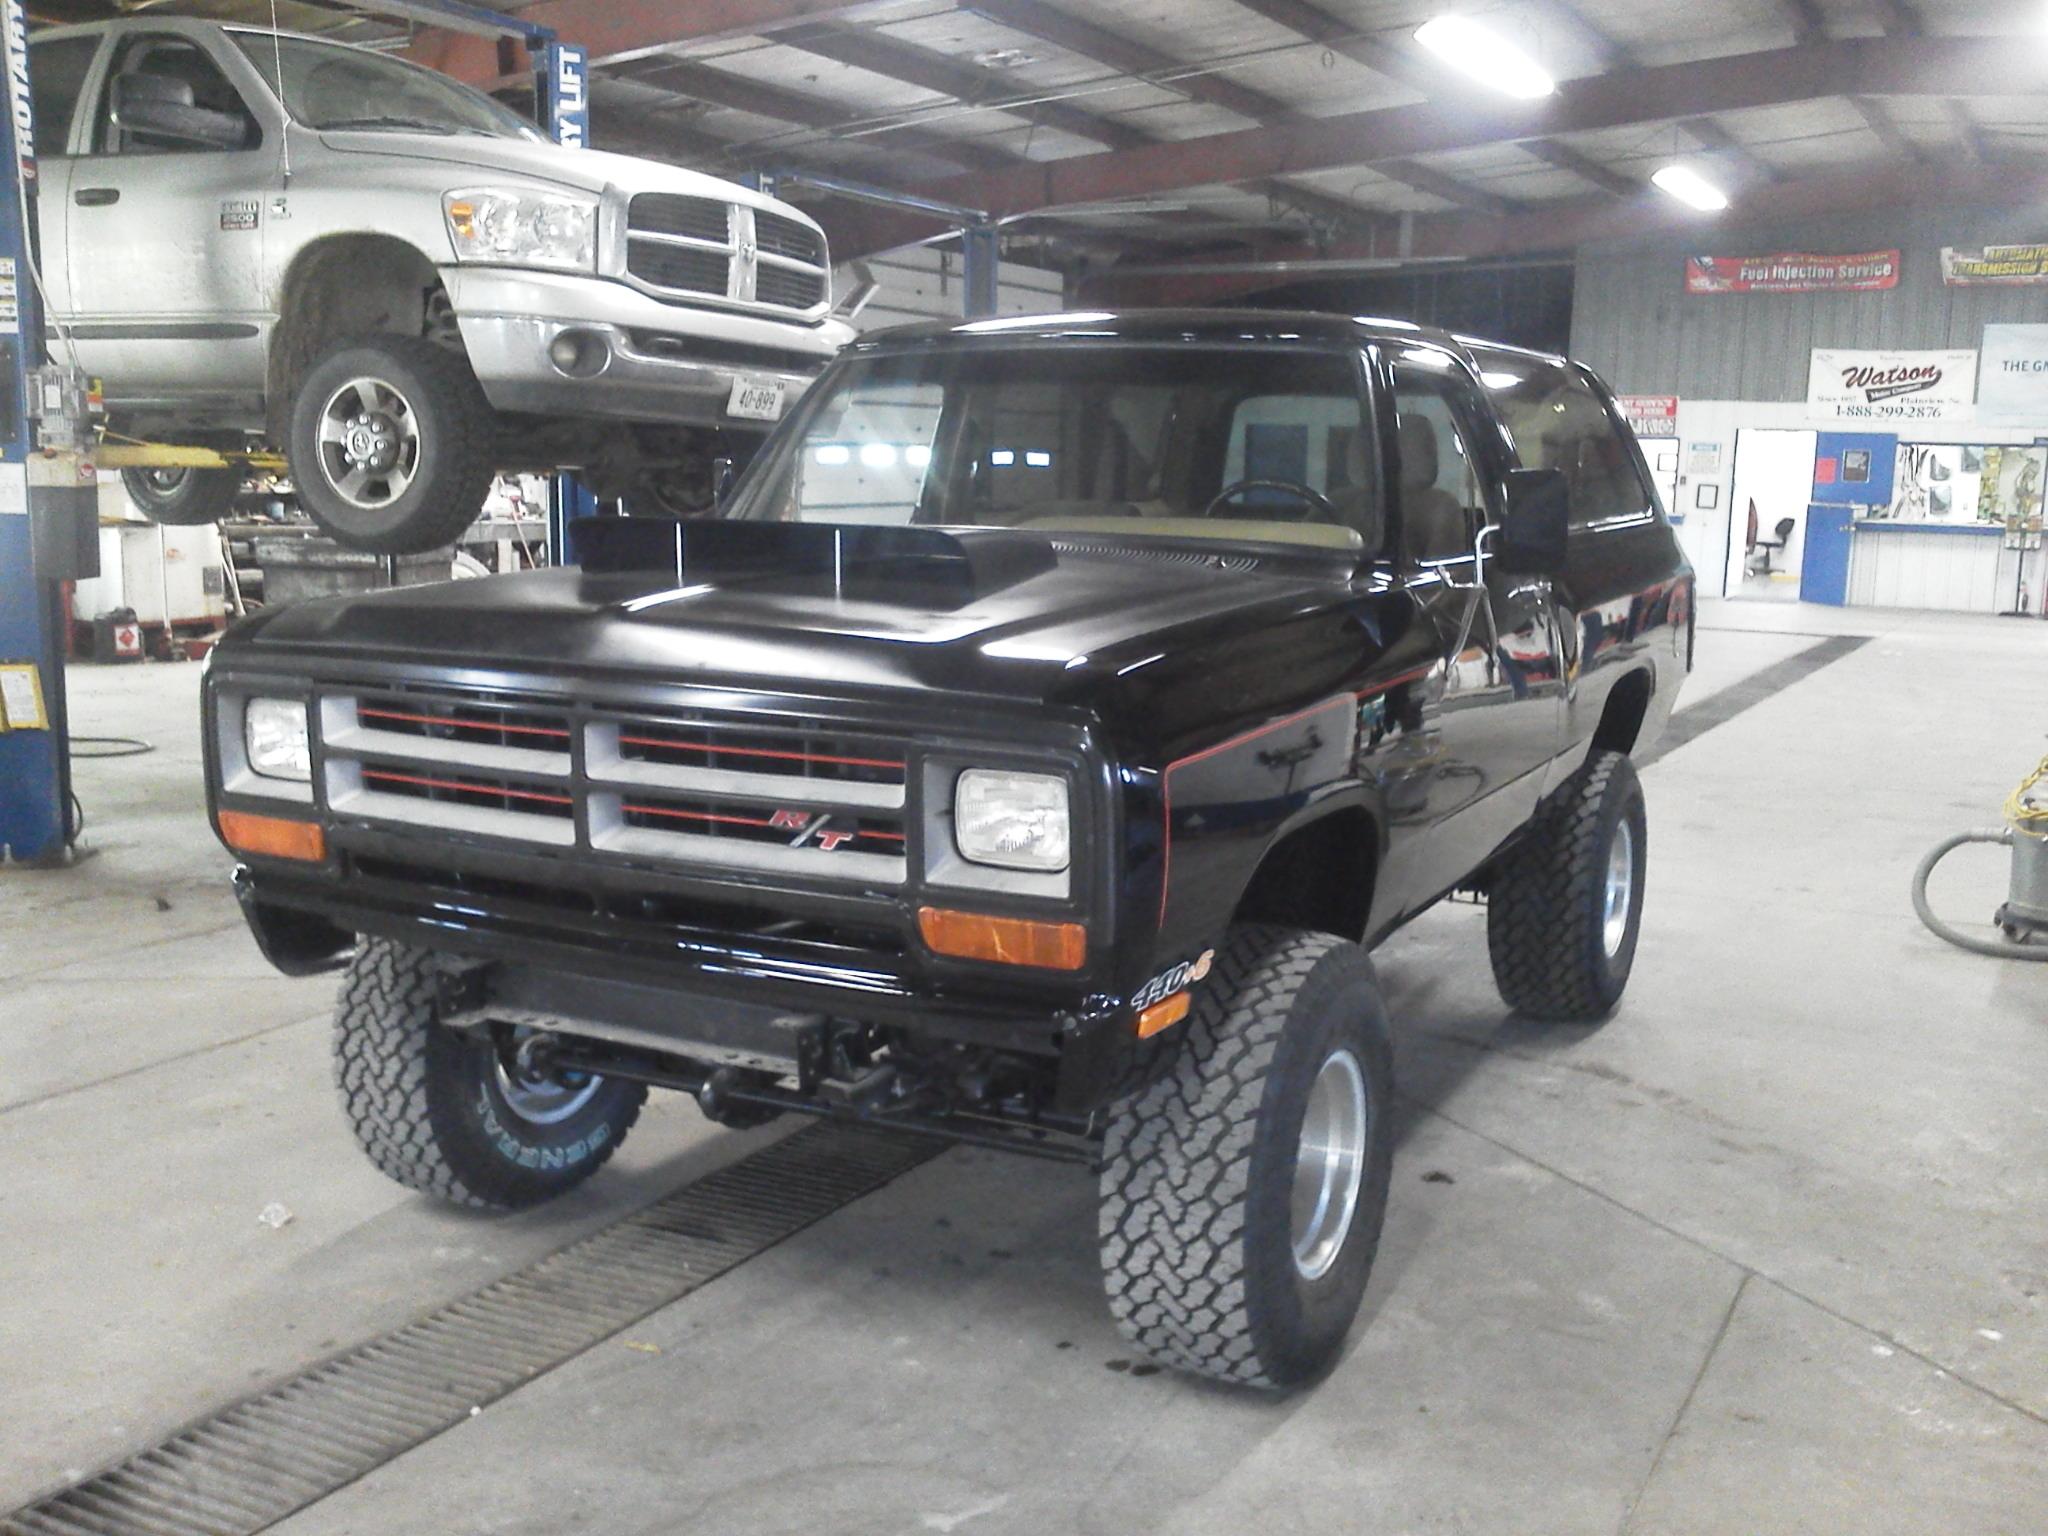 Attached picture 7477440-ramcharger.JPG